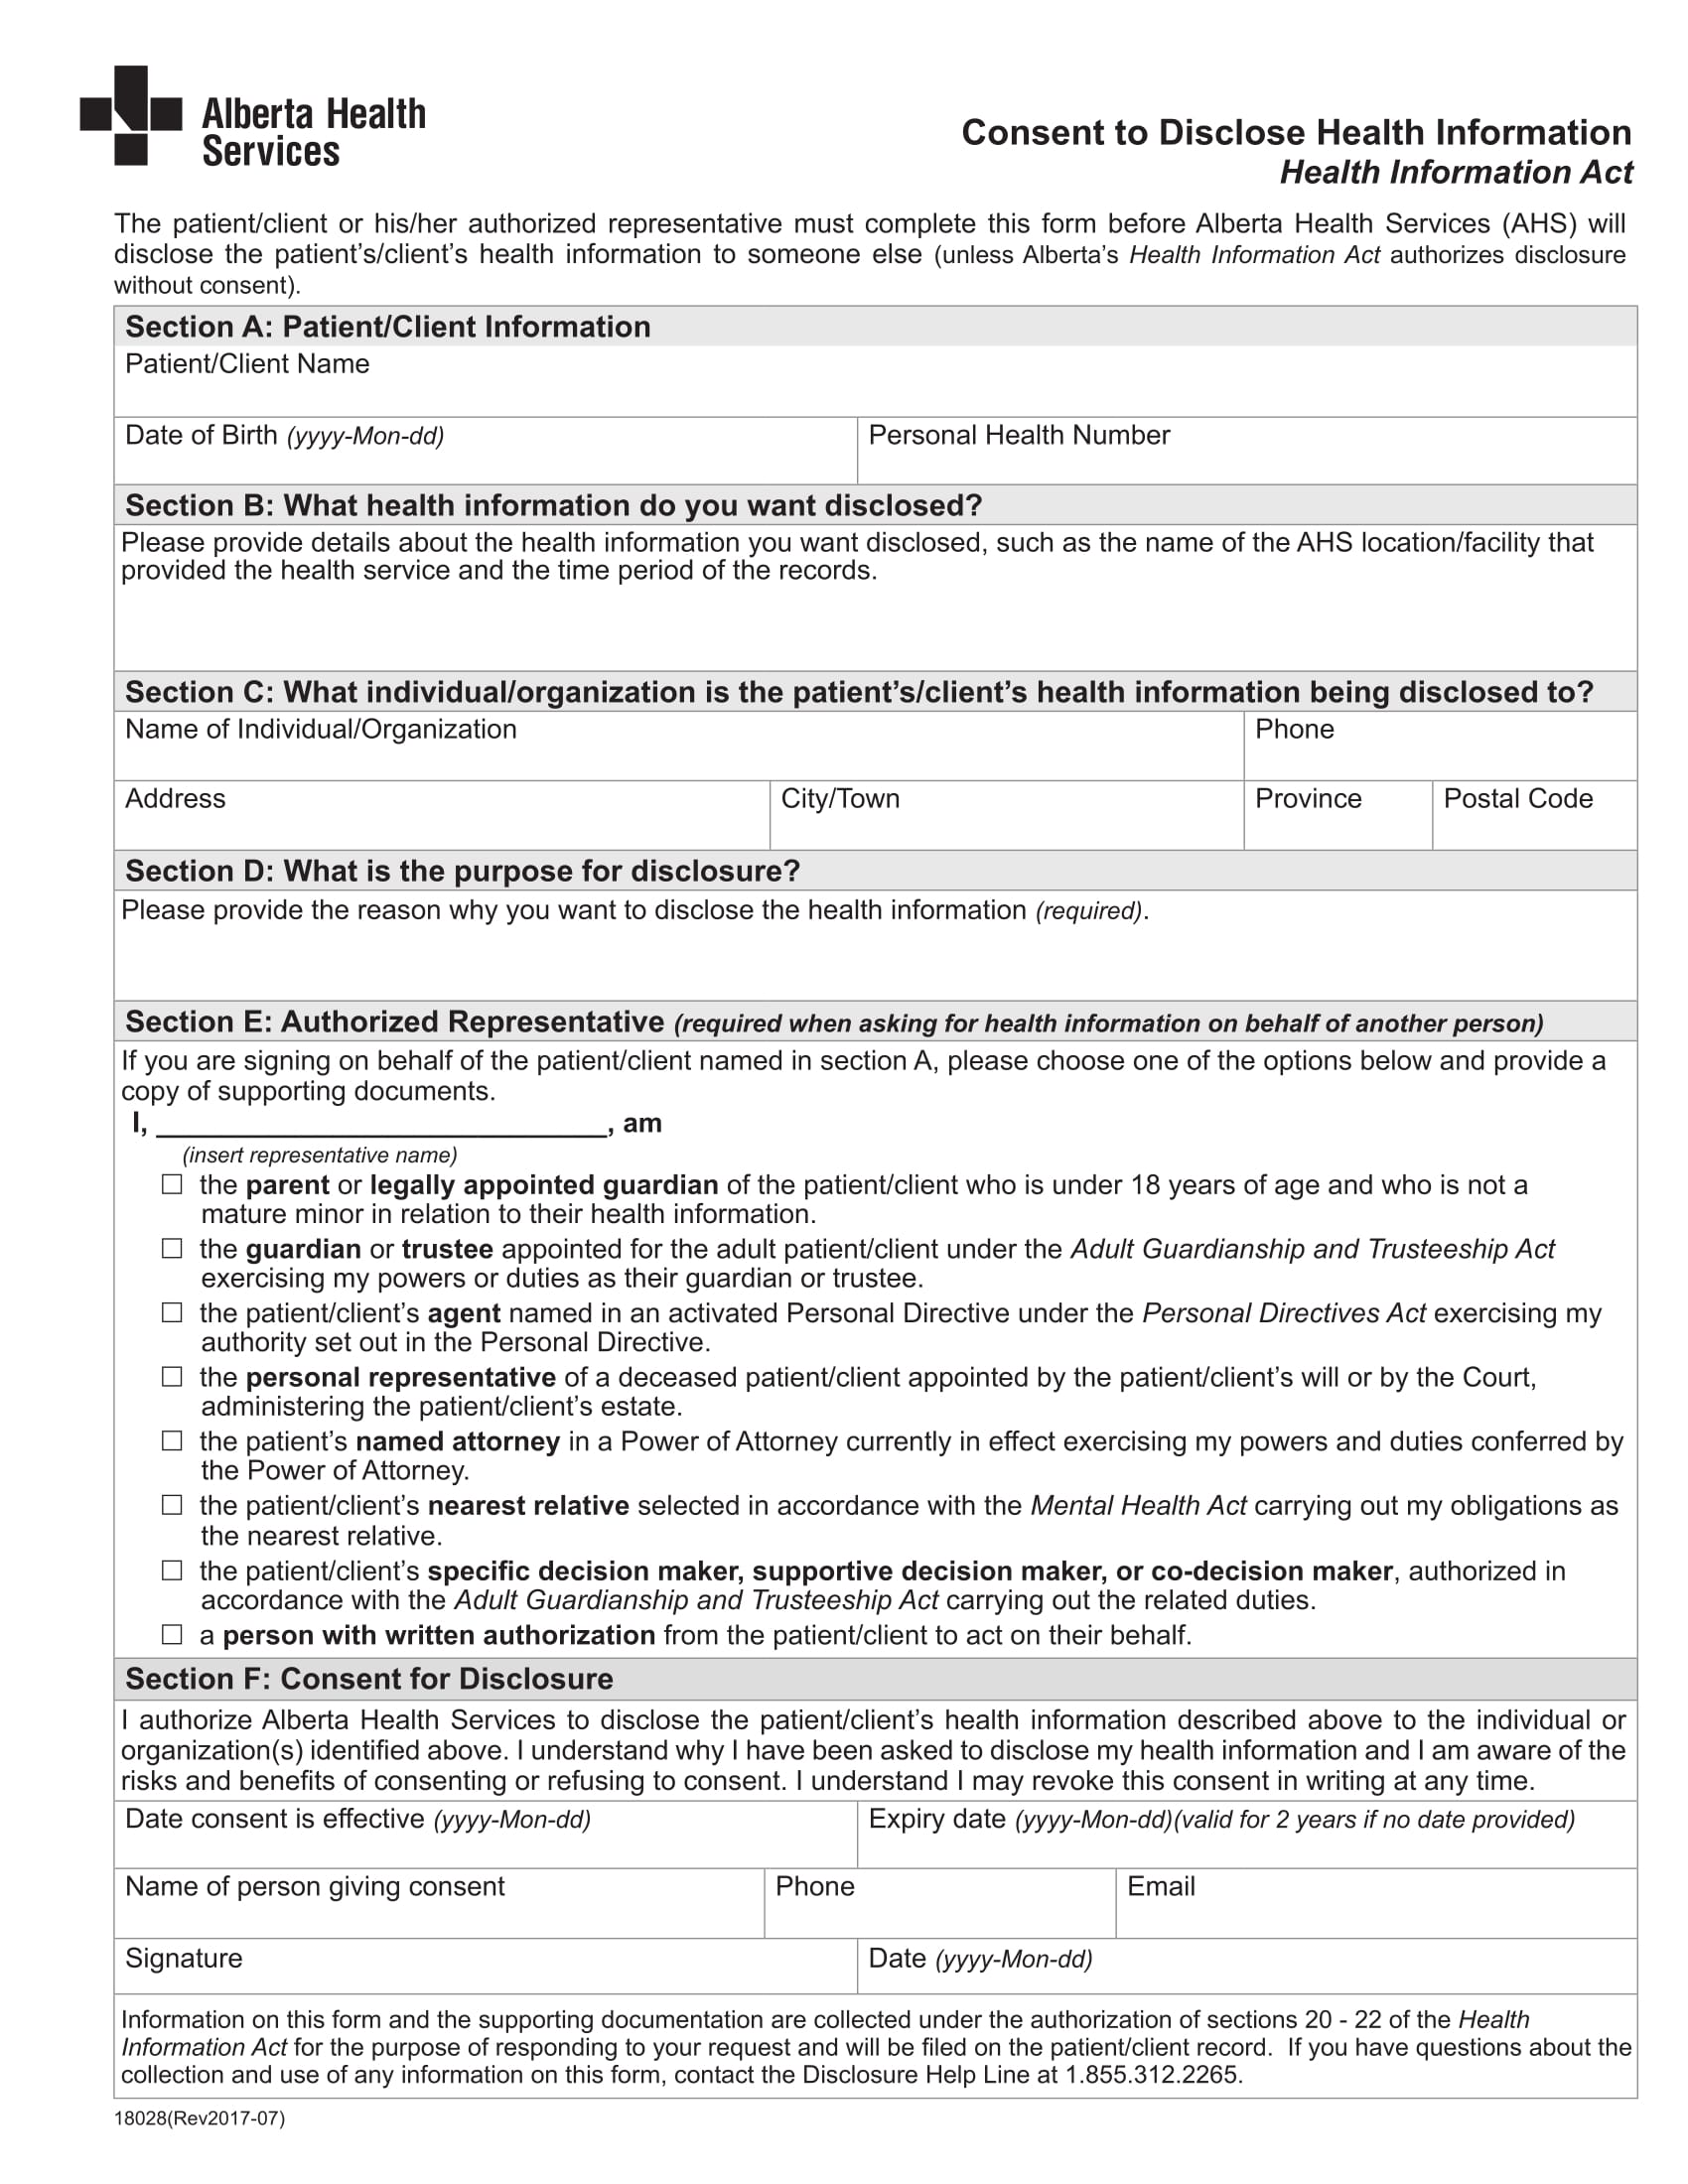 consent to disclose health information form 1